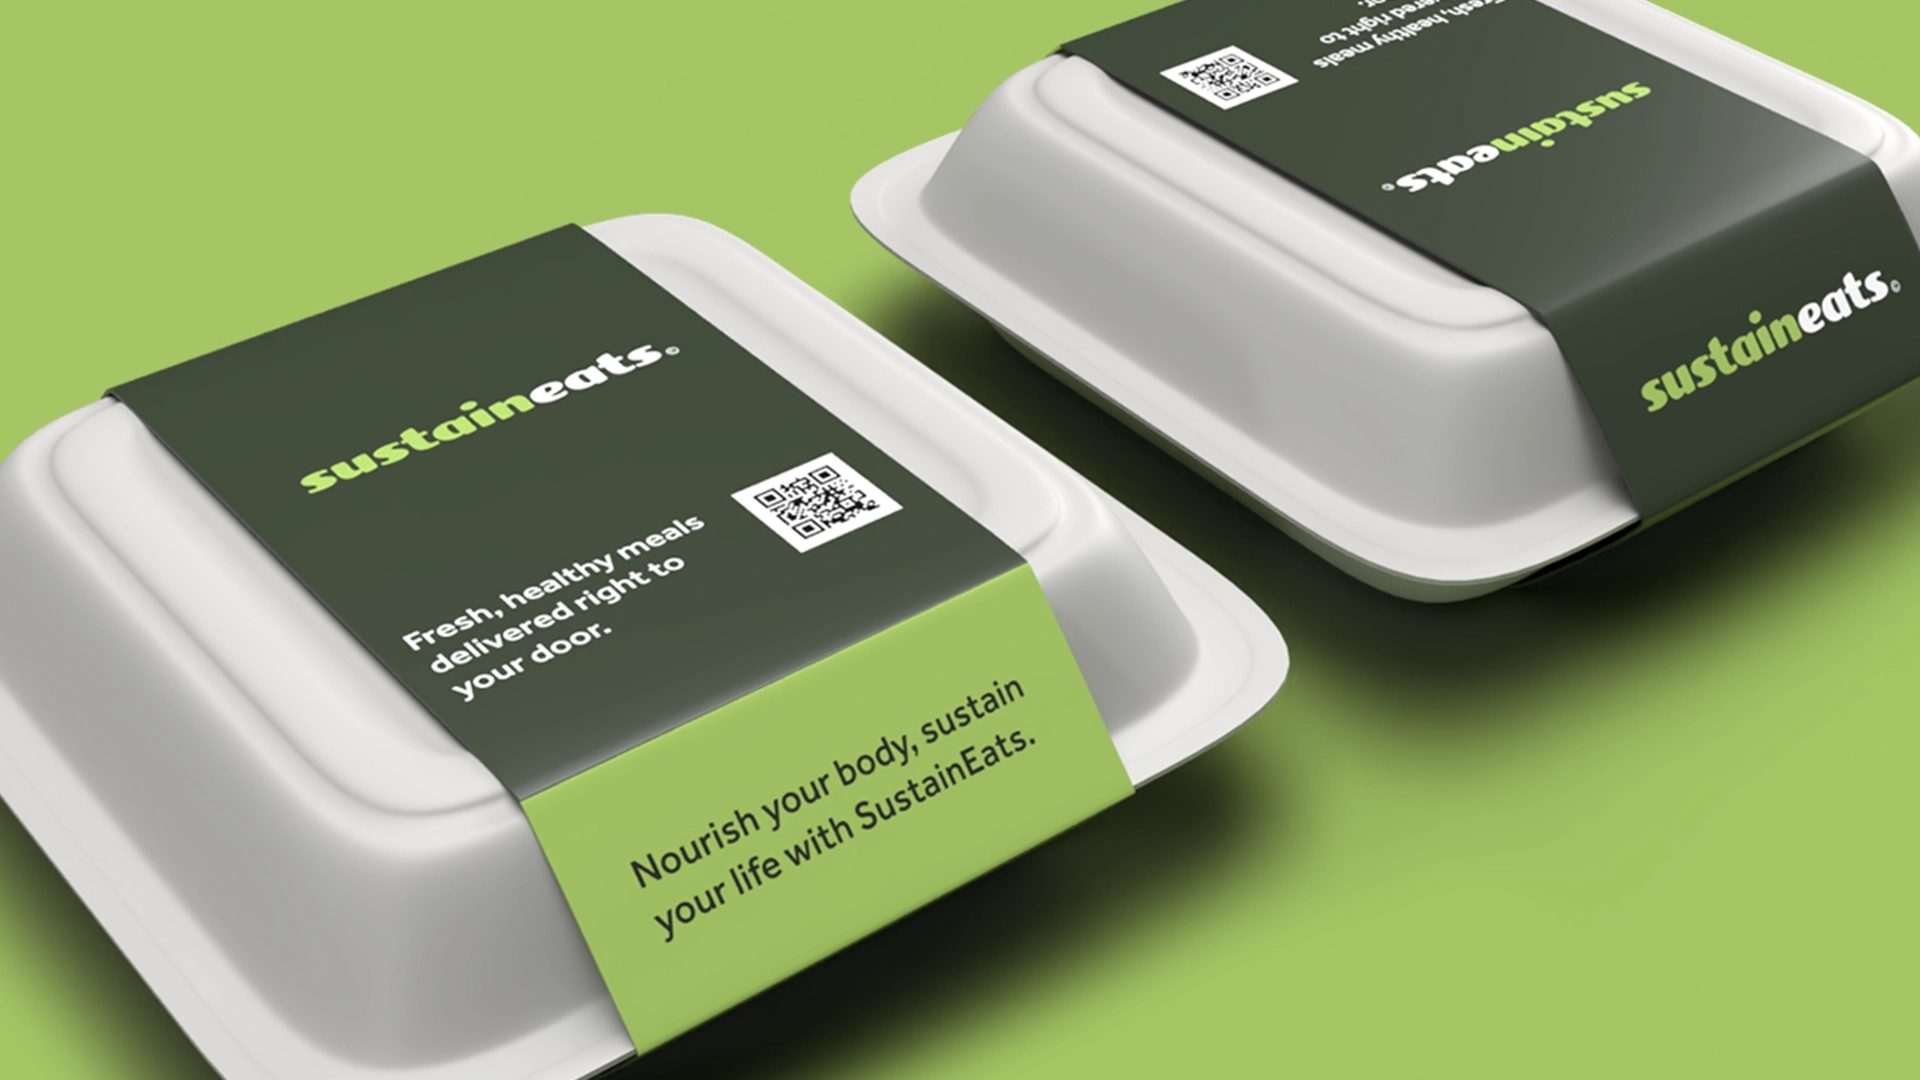 SustainEats' visual identity project case study